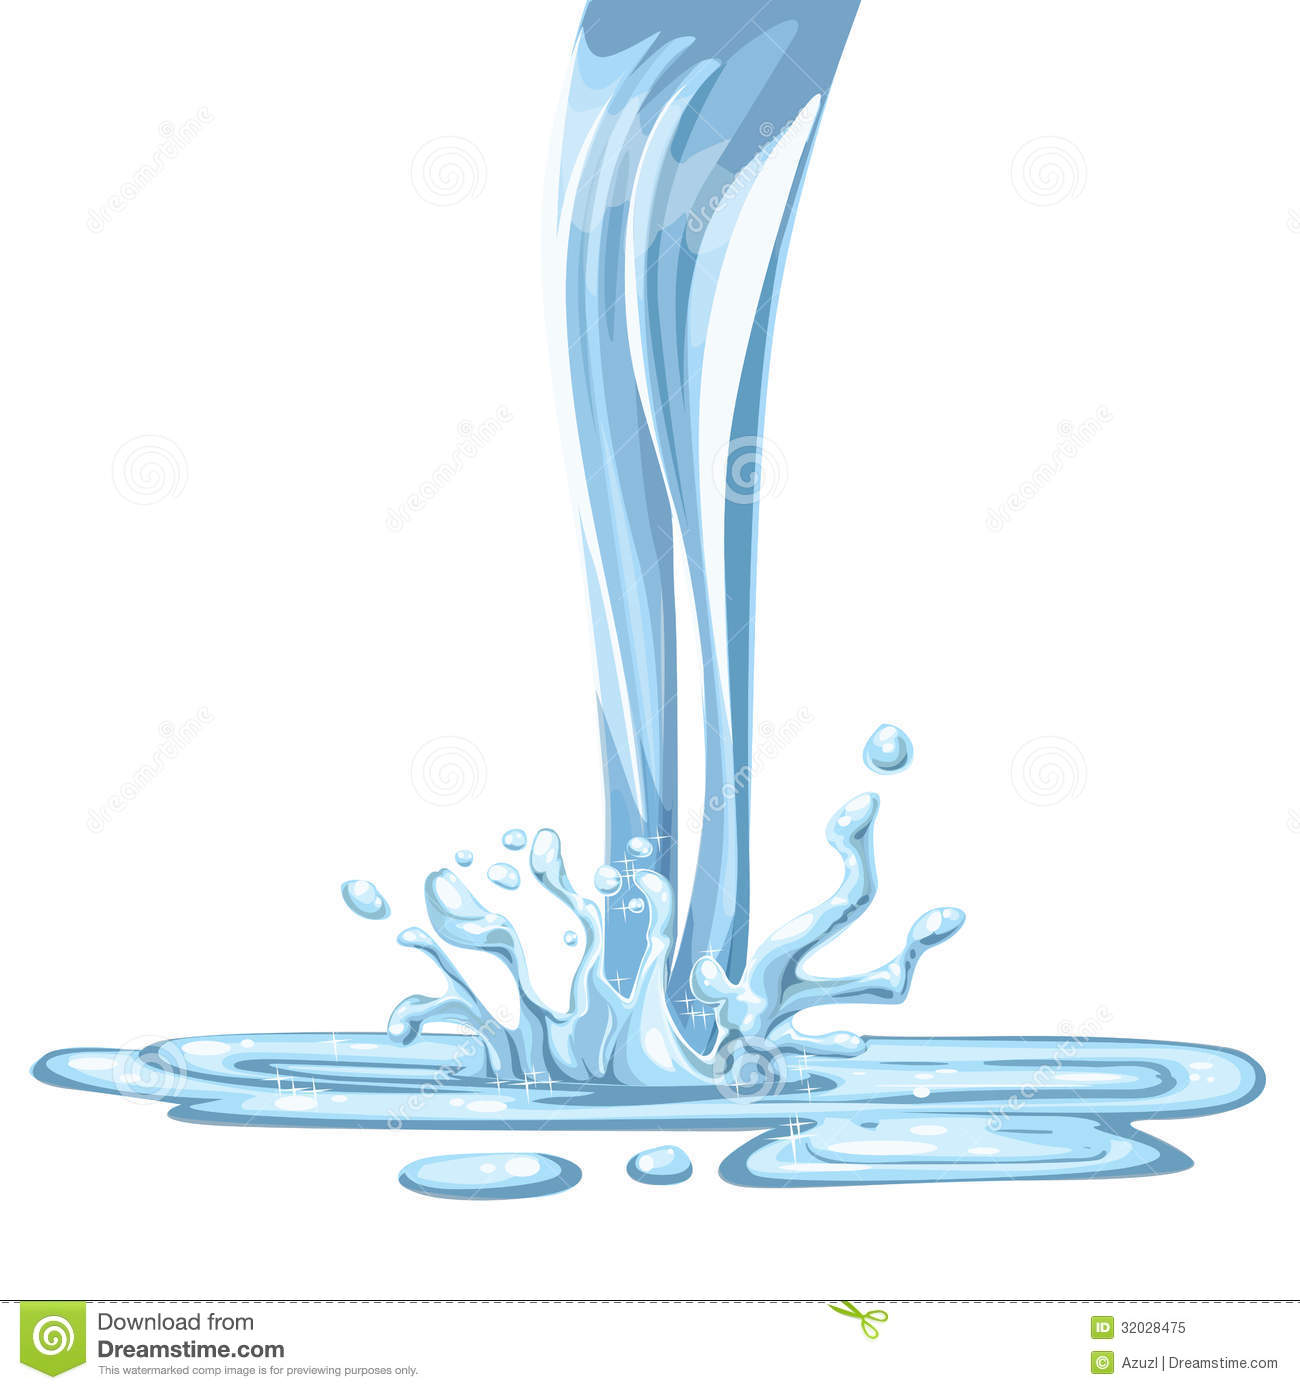 Flowing Water Clipart.